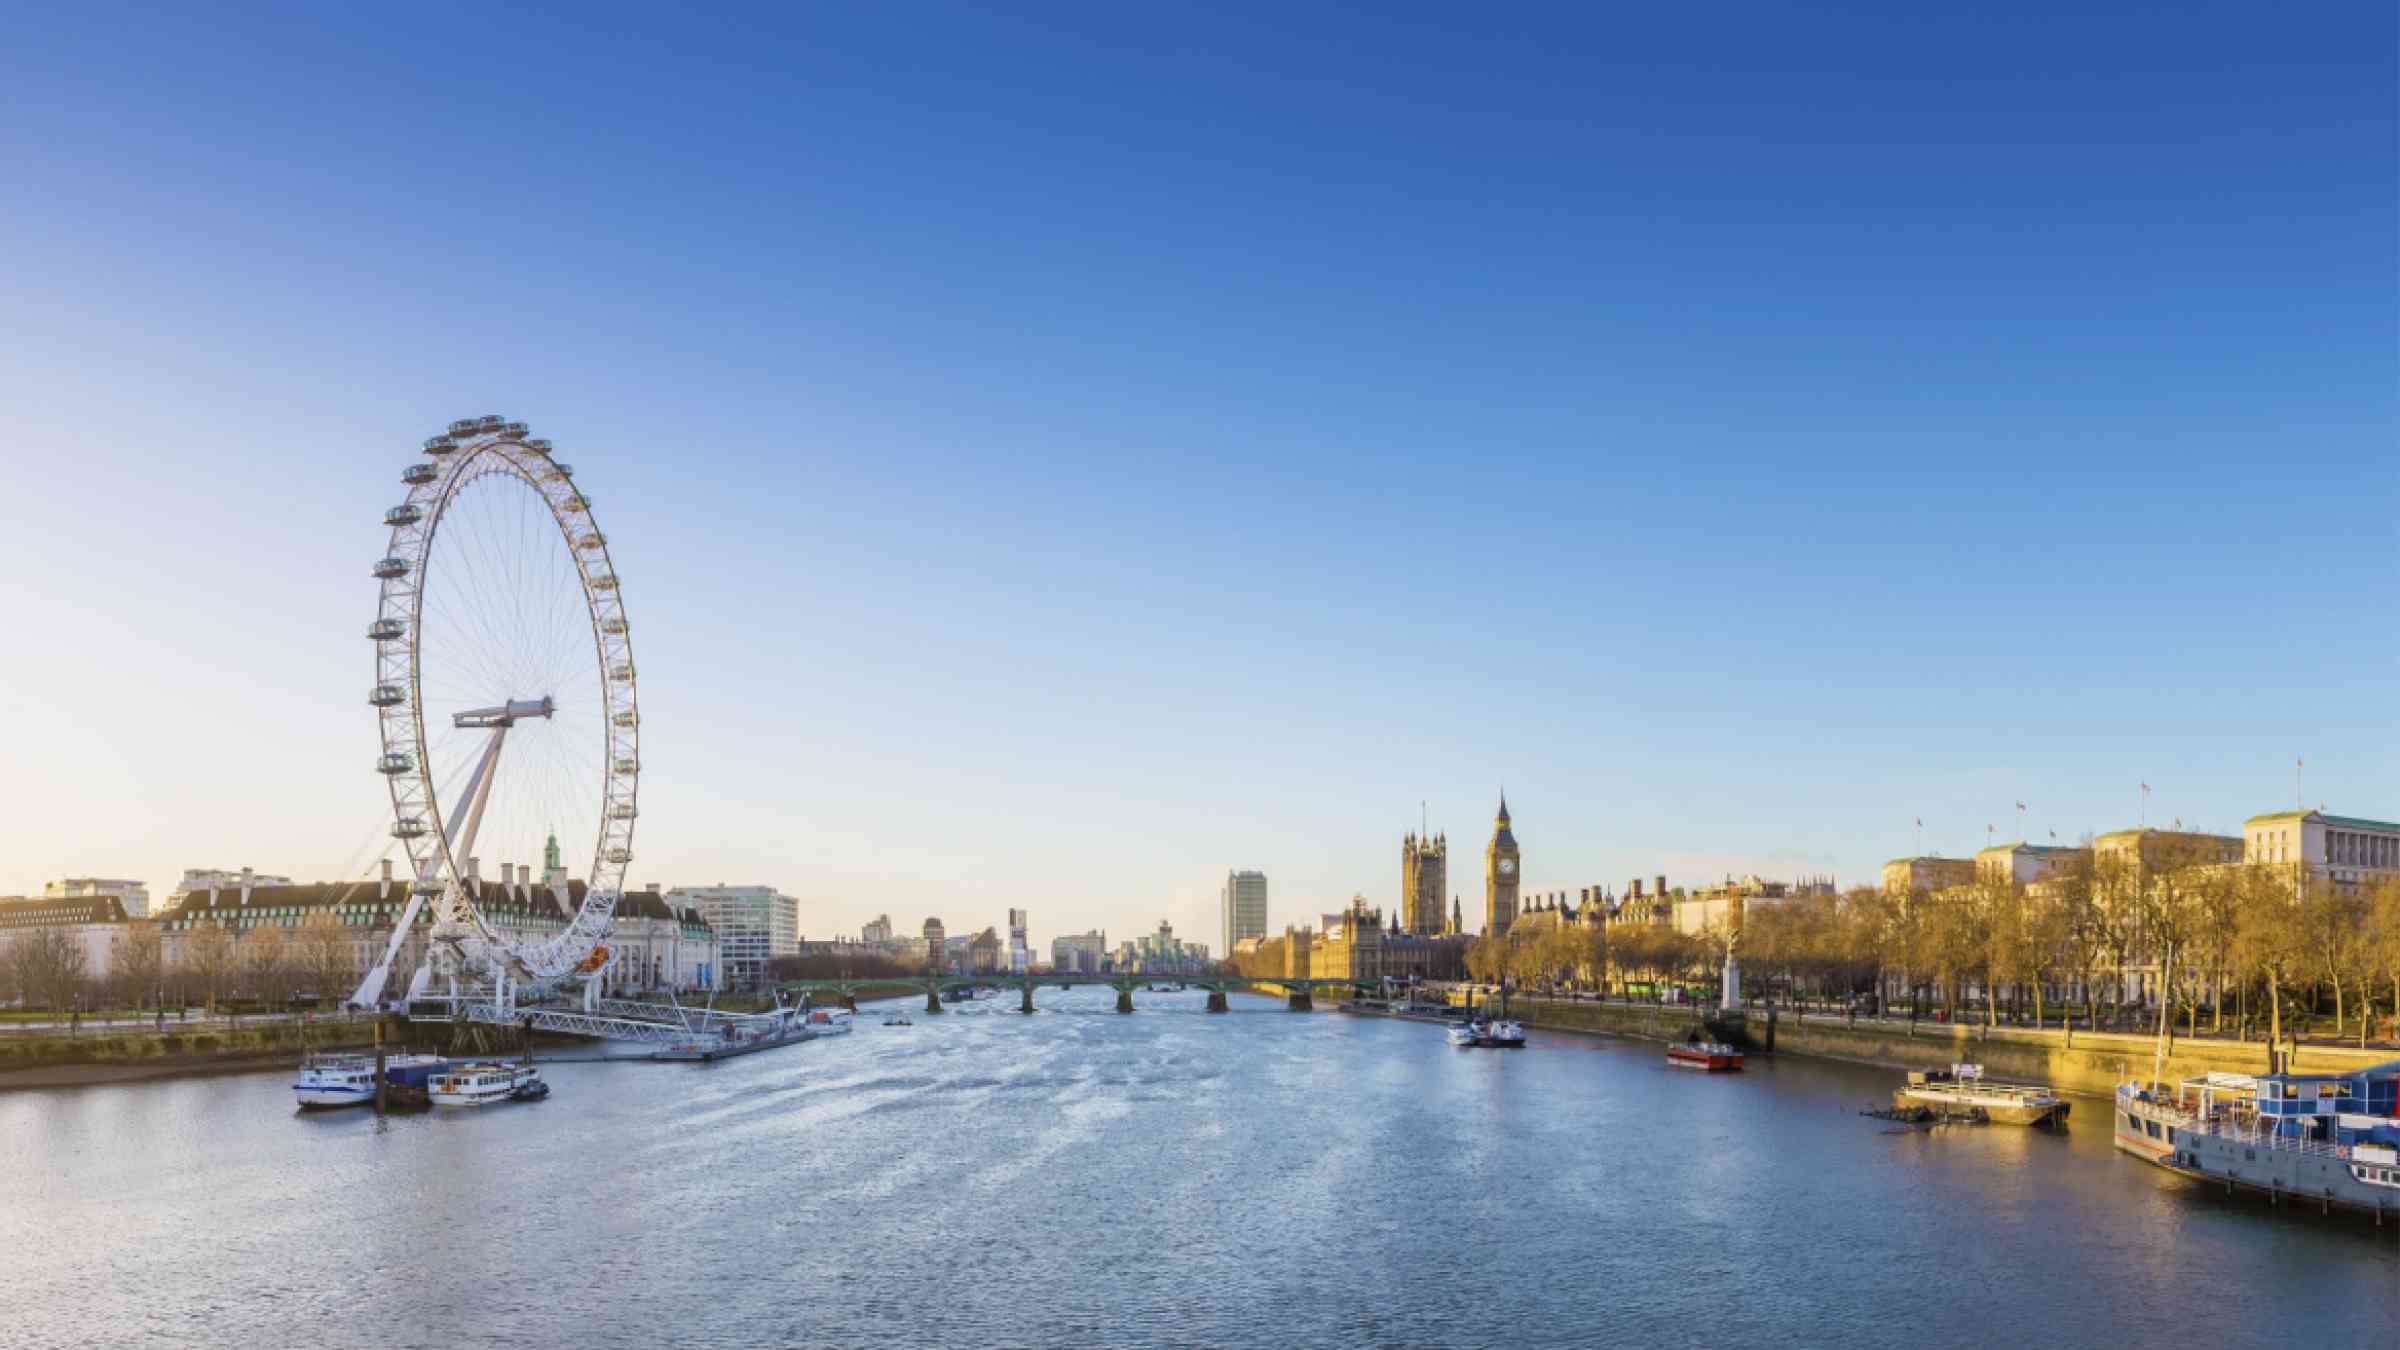 London skyline view at sunrise with famous landmarks, Big Ben, Houses of Parliament and ships on River Thames with clear blue sky